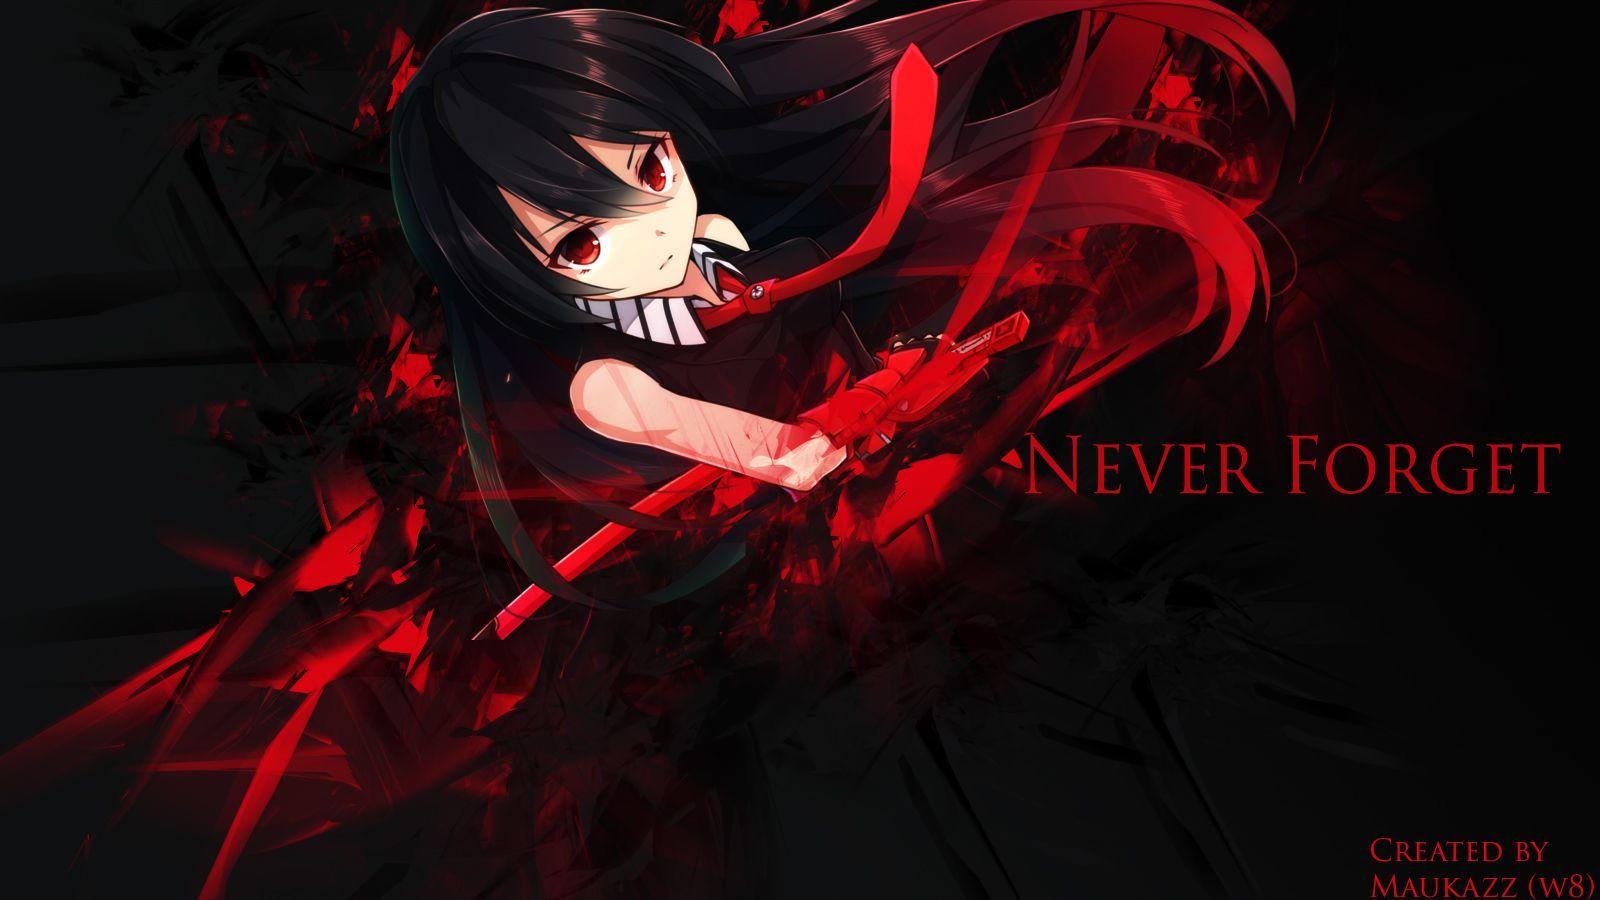 Download wallpaper 1600x900 blossom, anime girl, beautiful, 16:9 widescreen  1600x900 hd background, 24311